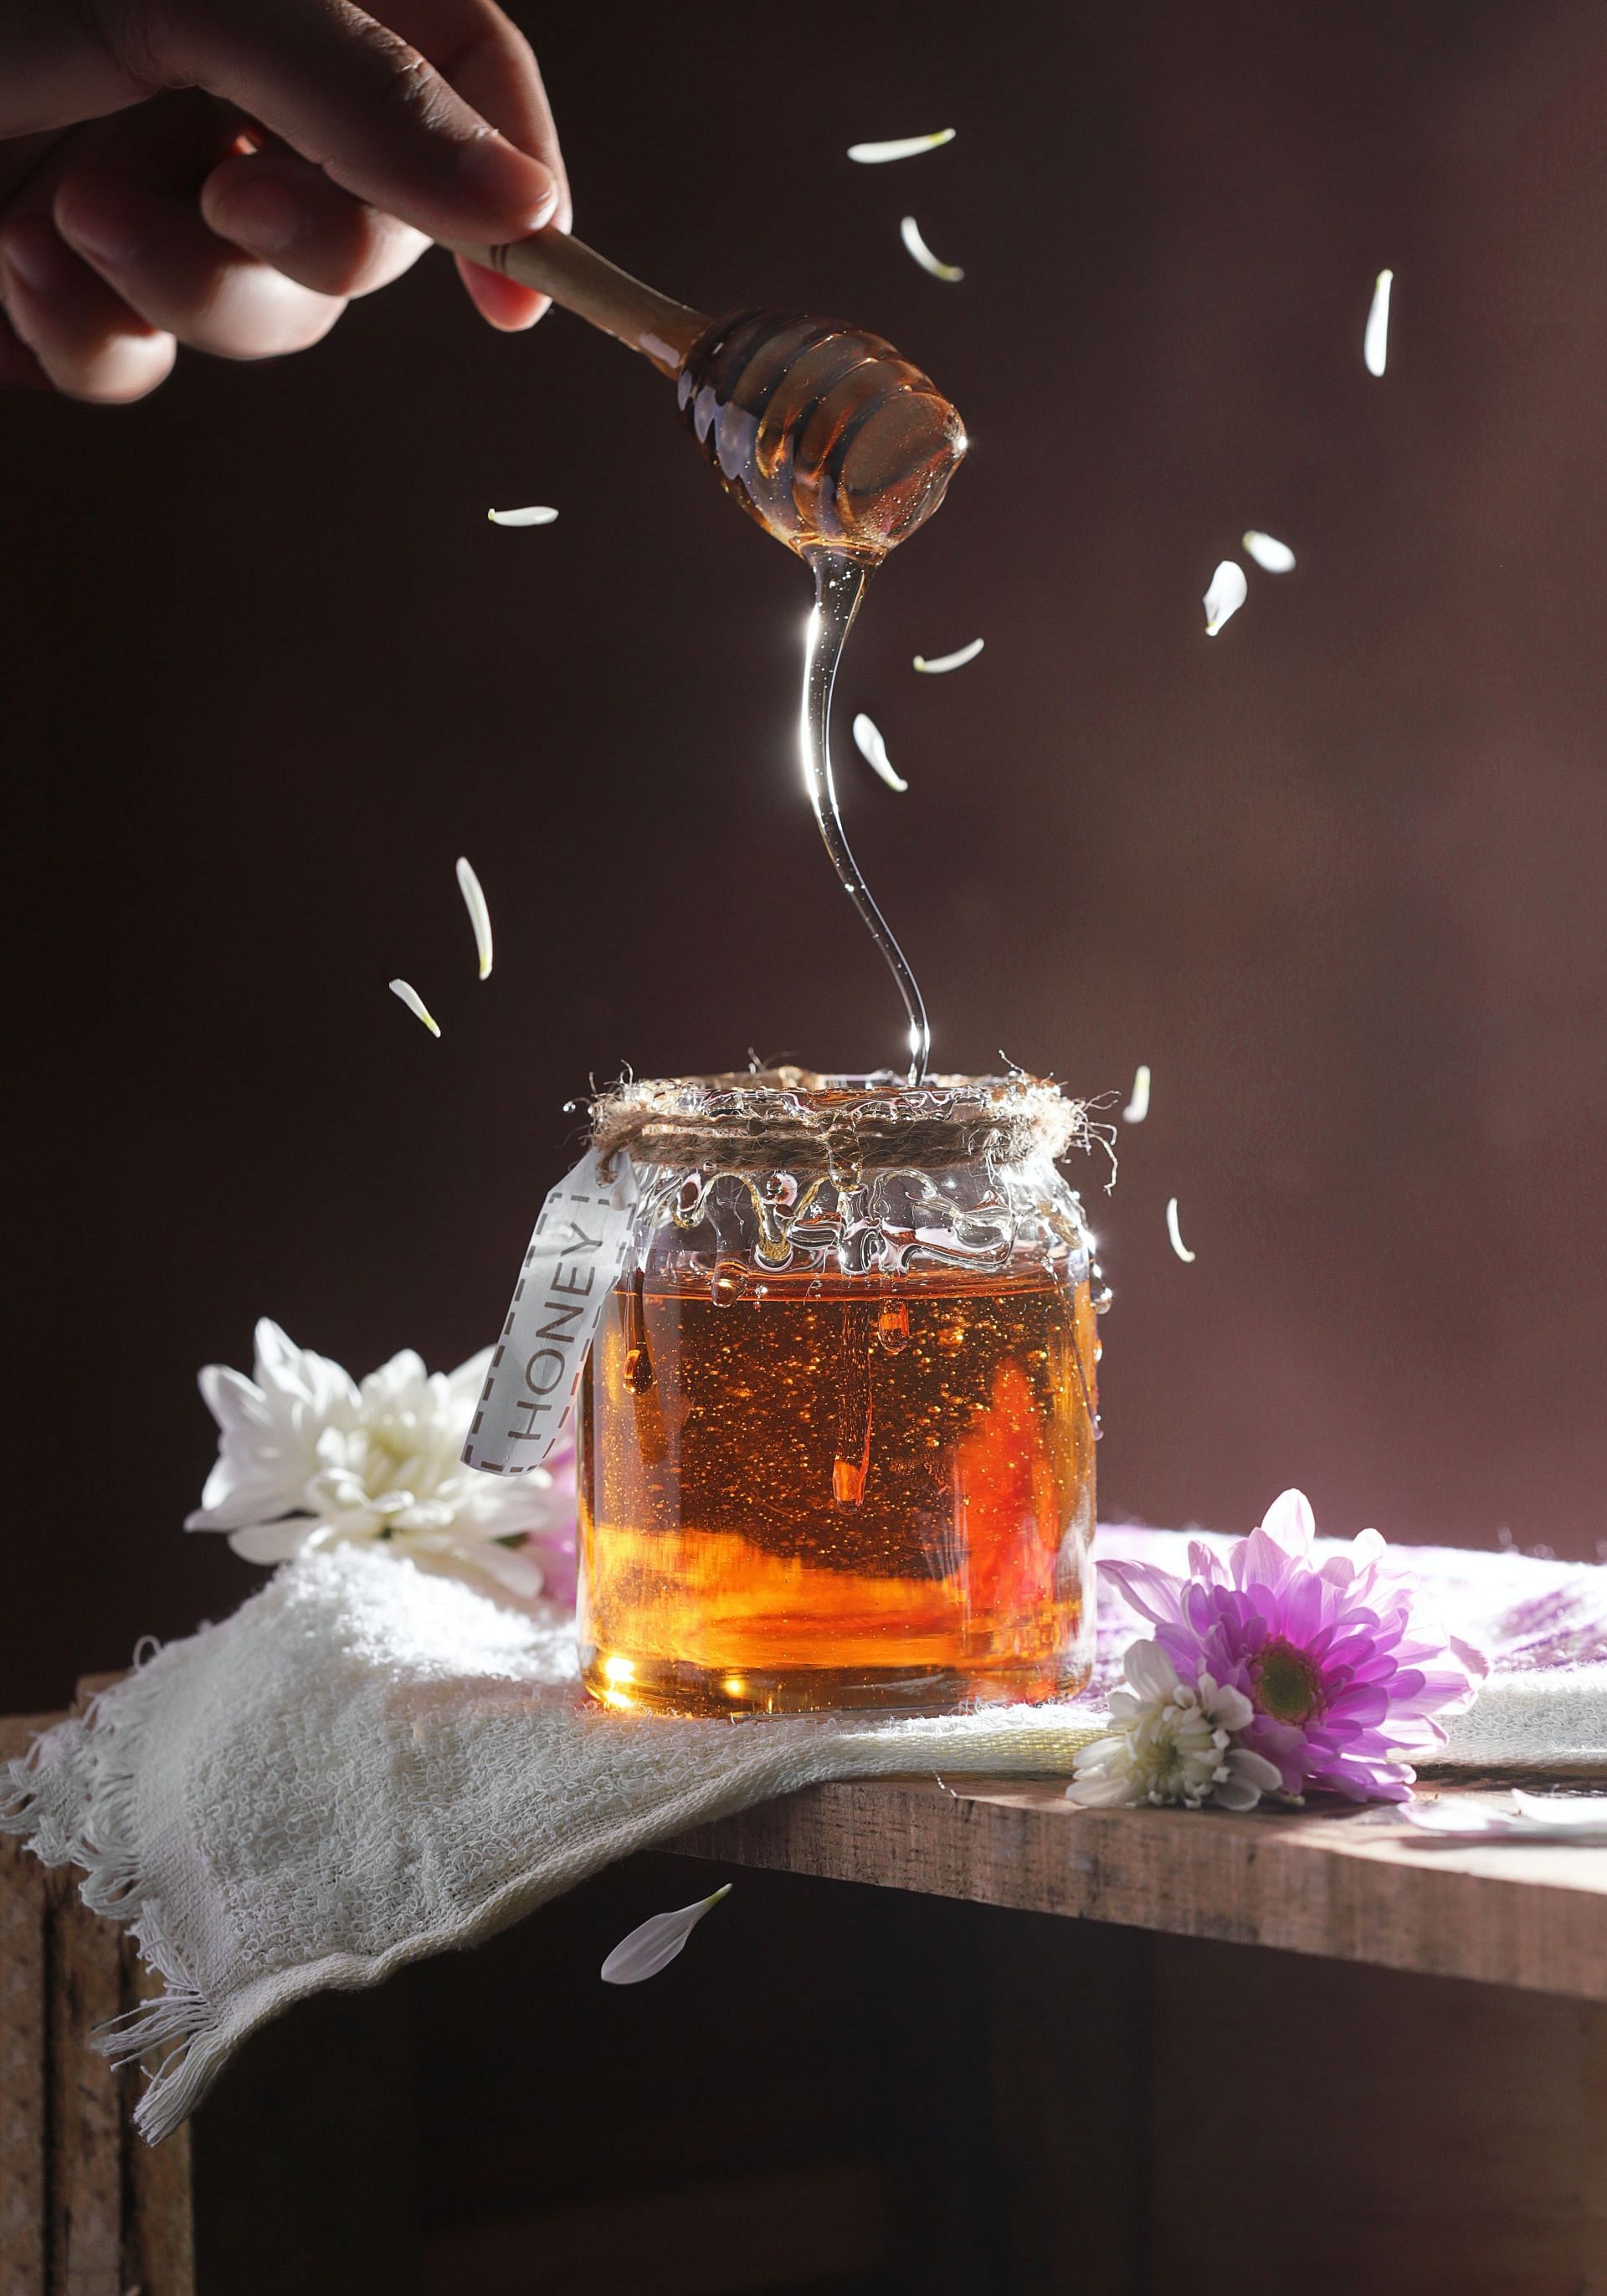 Say goodbye to refined sugar and hello to the goodness of honey. (image via Unsplash)